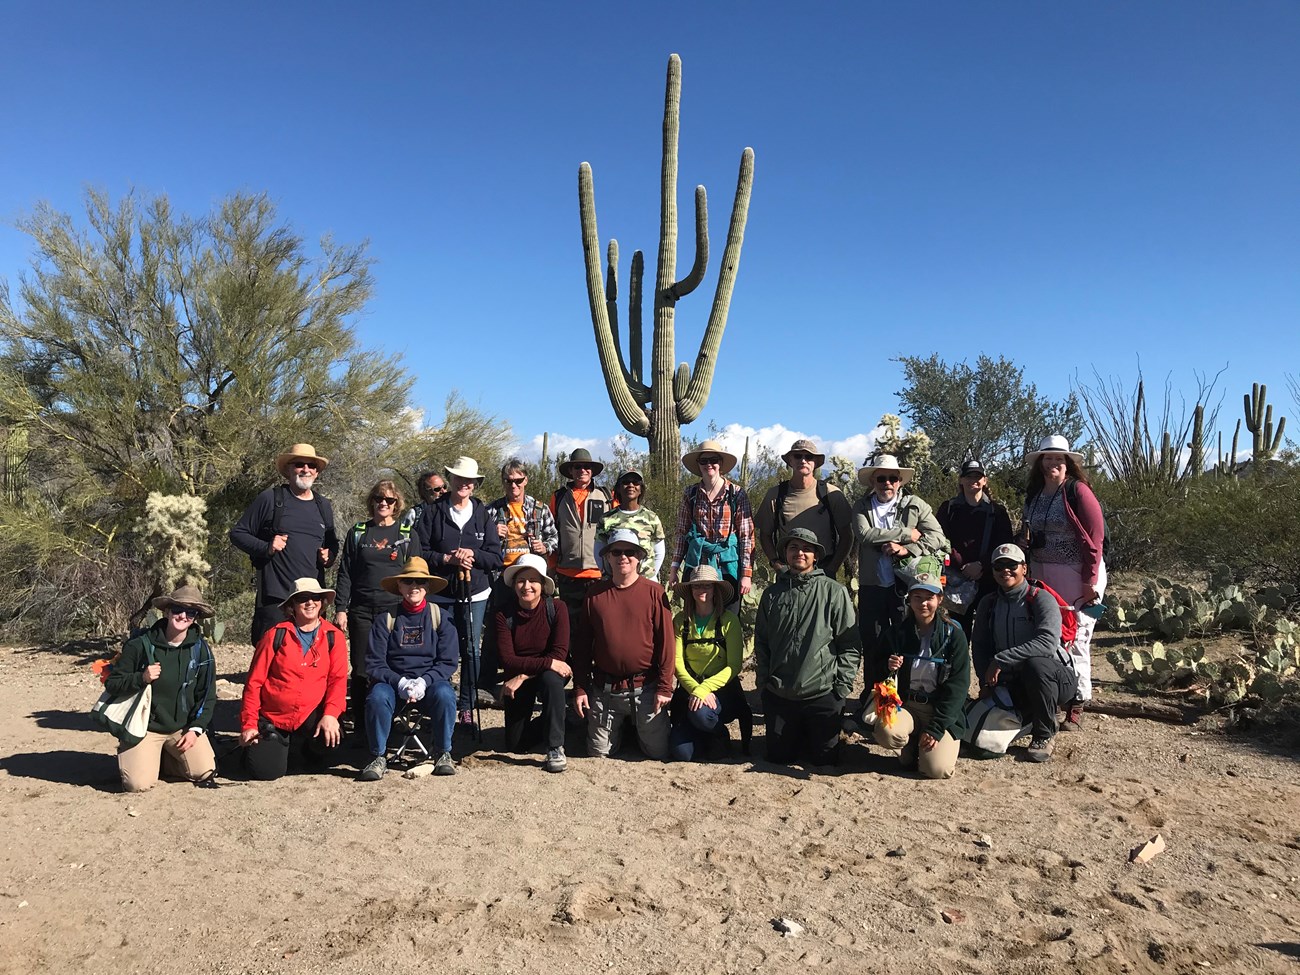 Group photo of volunteers after the census. Behind them is a tall saguaro with at least five arms.